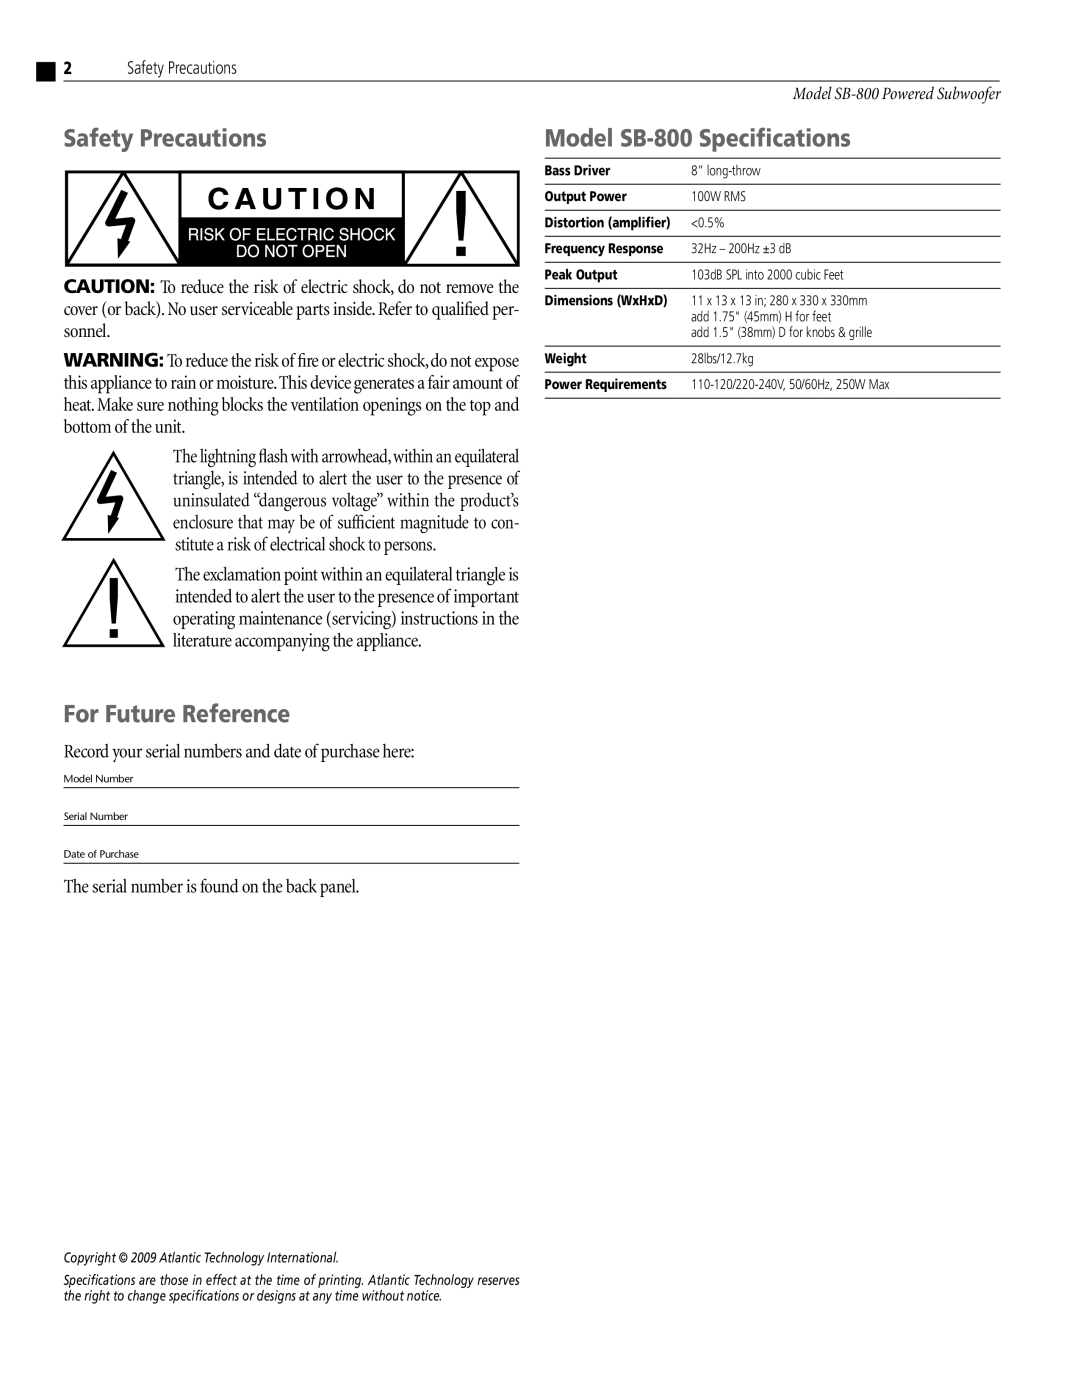 Atlantic Technology instruction manual Safety Precautions, Model SB-800Specifications, For Future Reference 